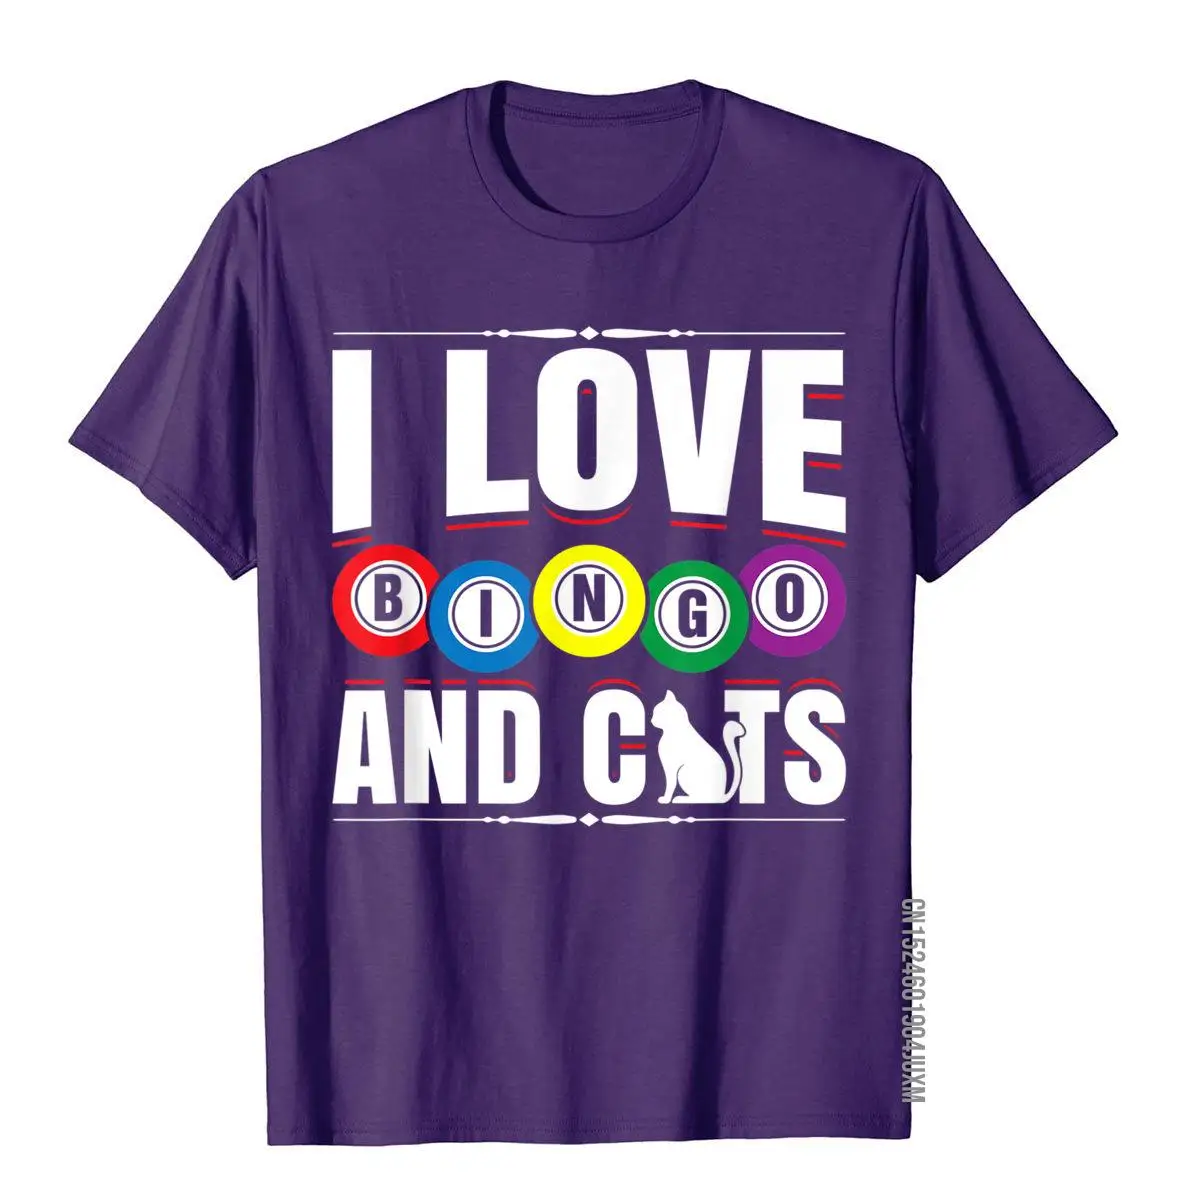 I Love Bingo And Cats Funny Lucky Player Humor Cool T-Shirt__97A3575purple